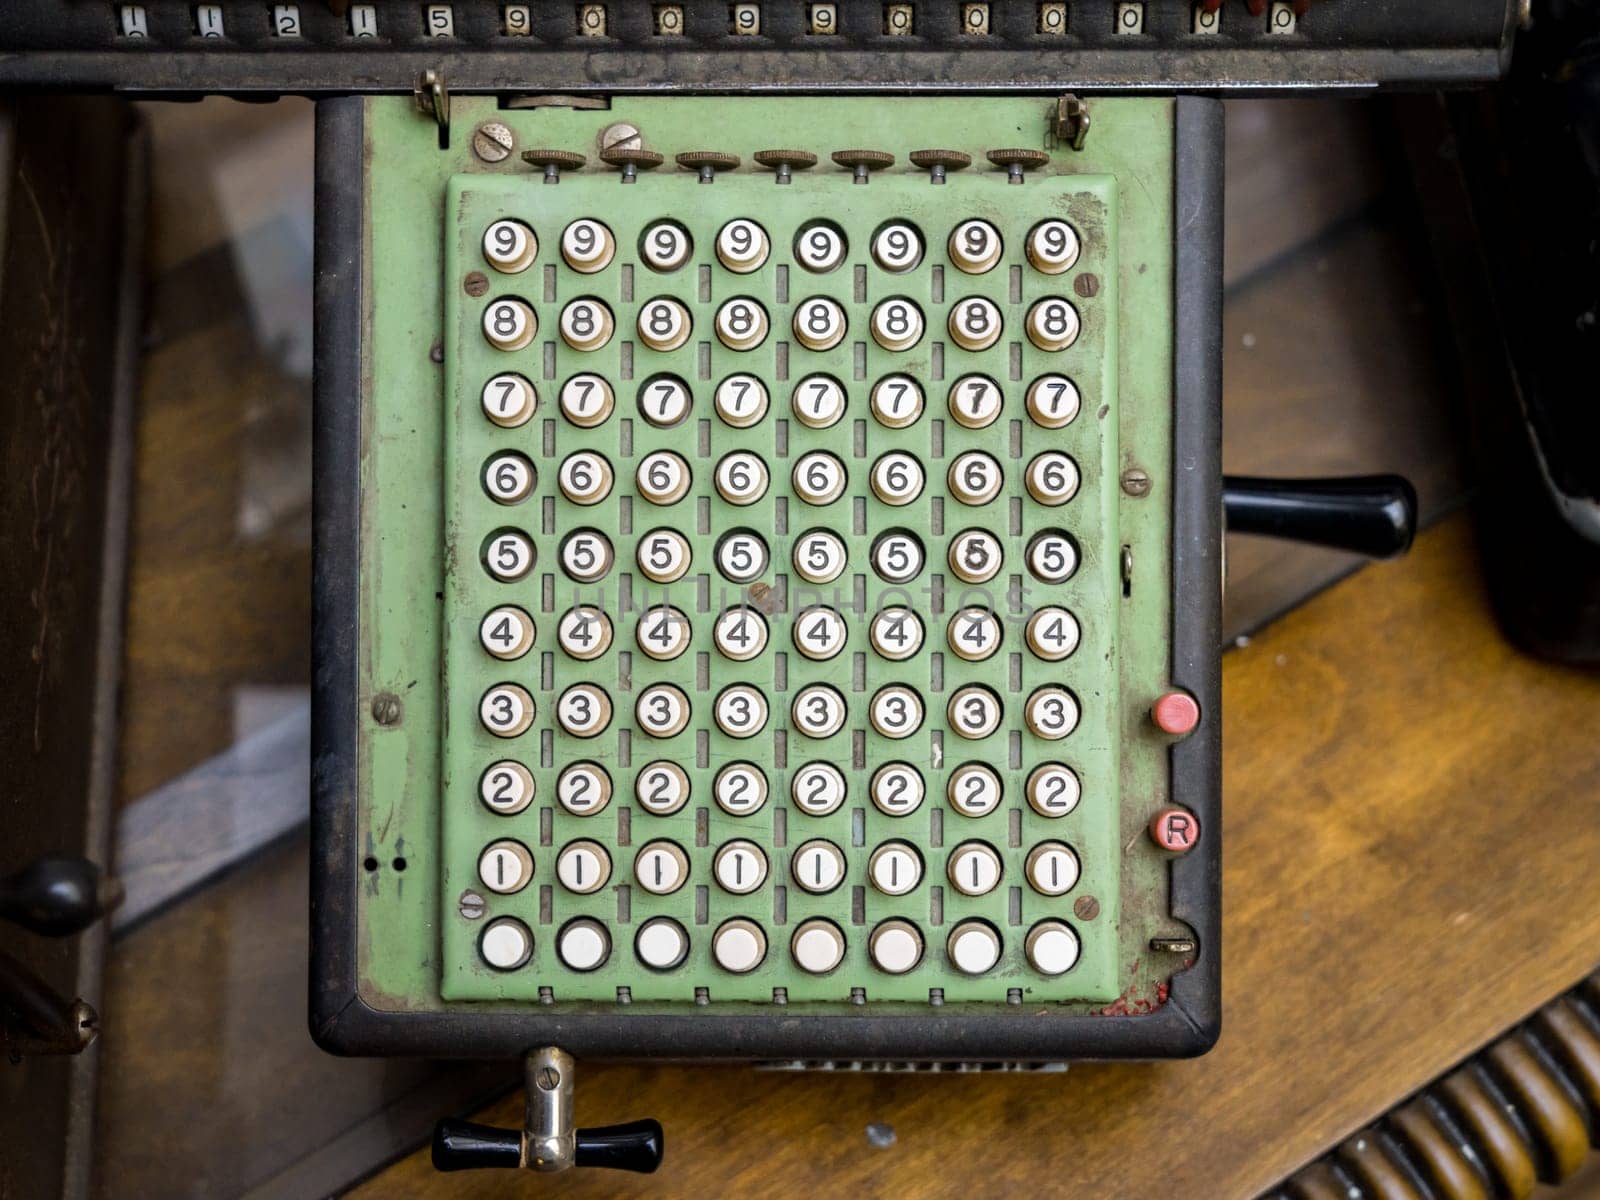 Simple layout of the number keys on antique mechanical calculator or accounting machine